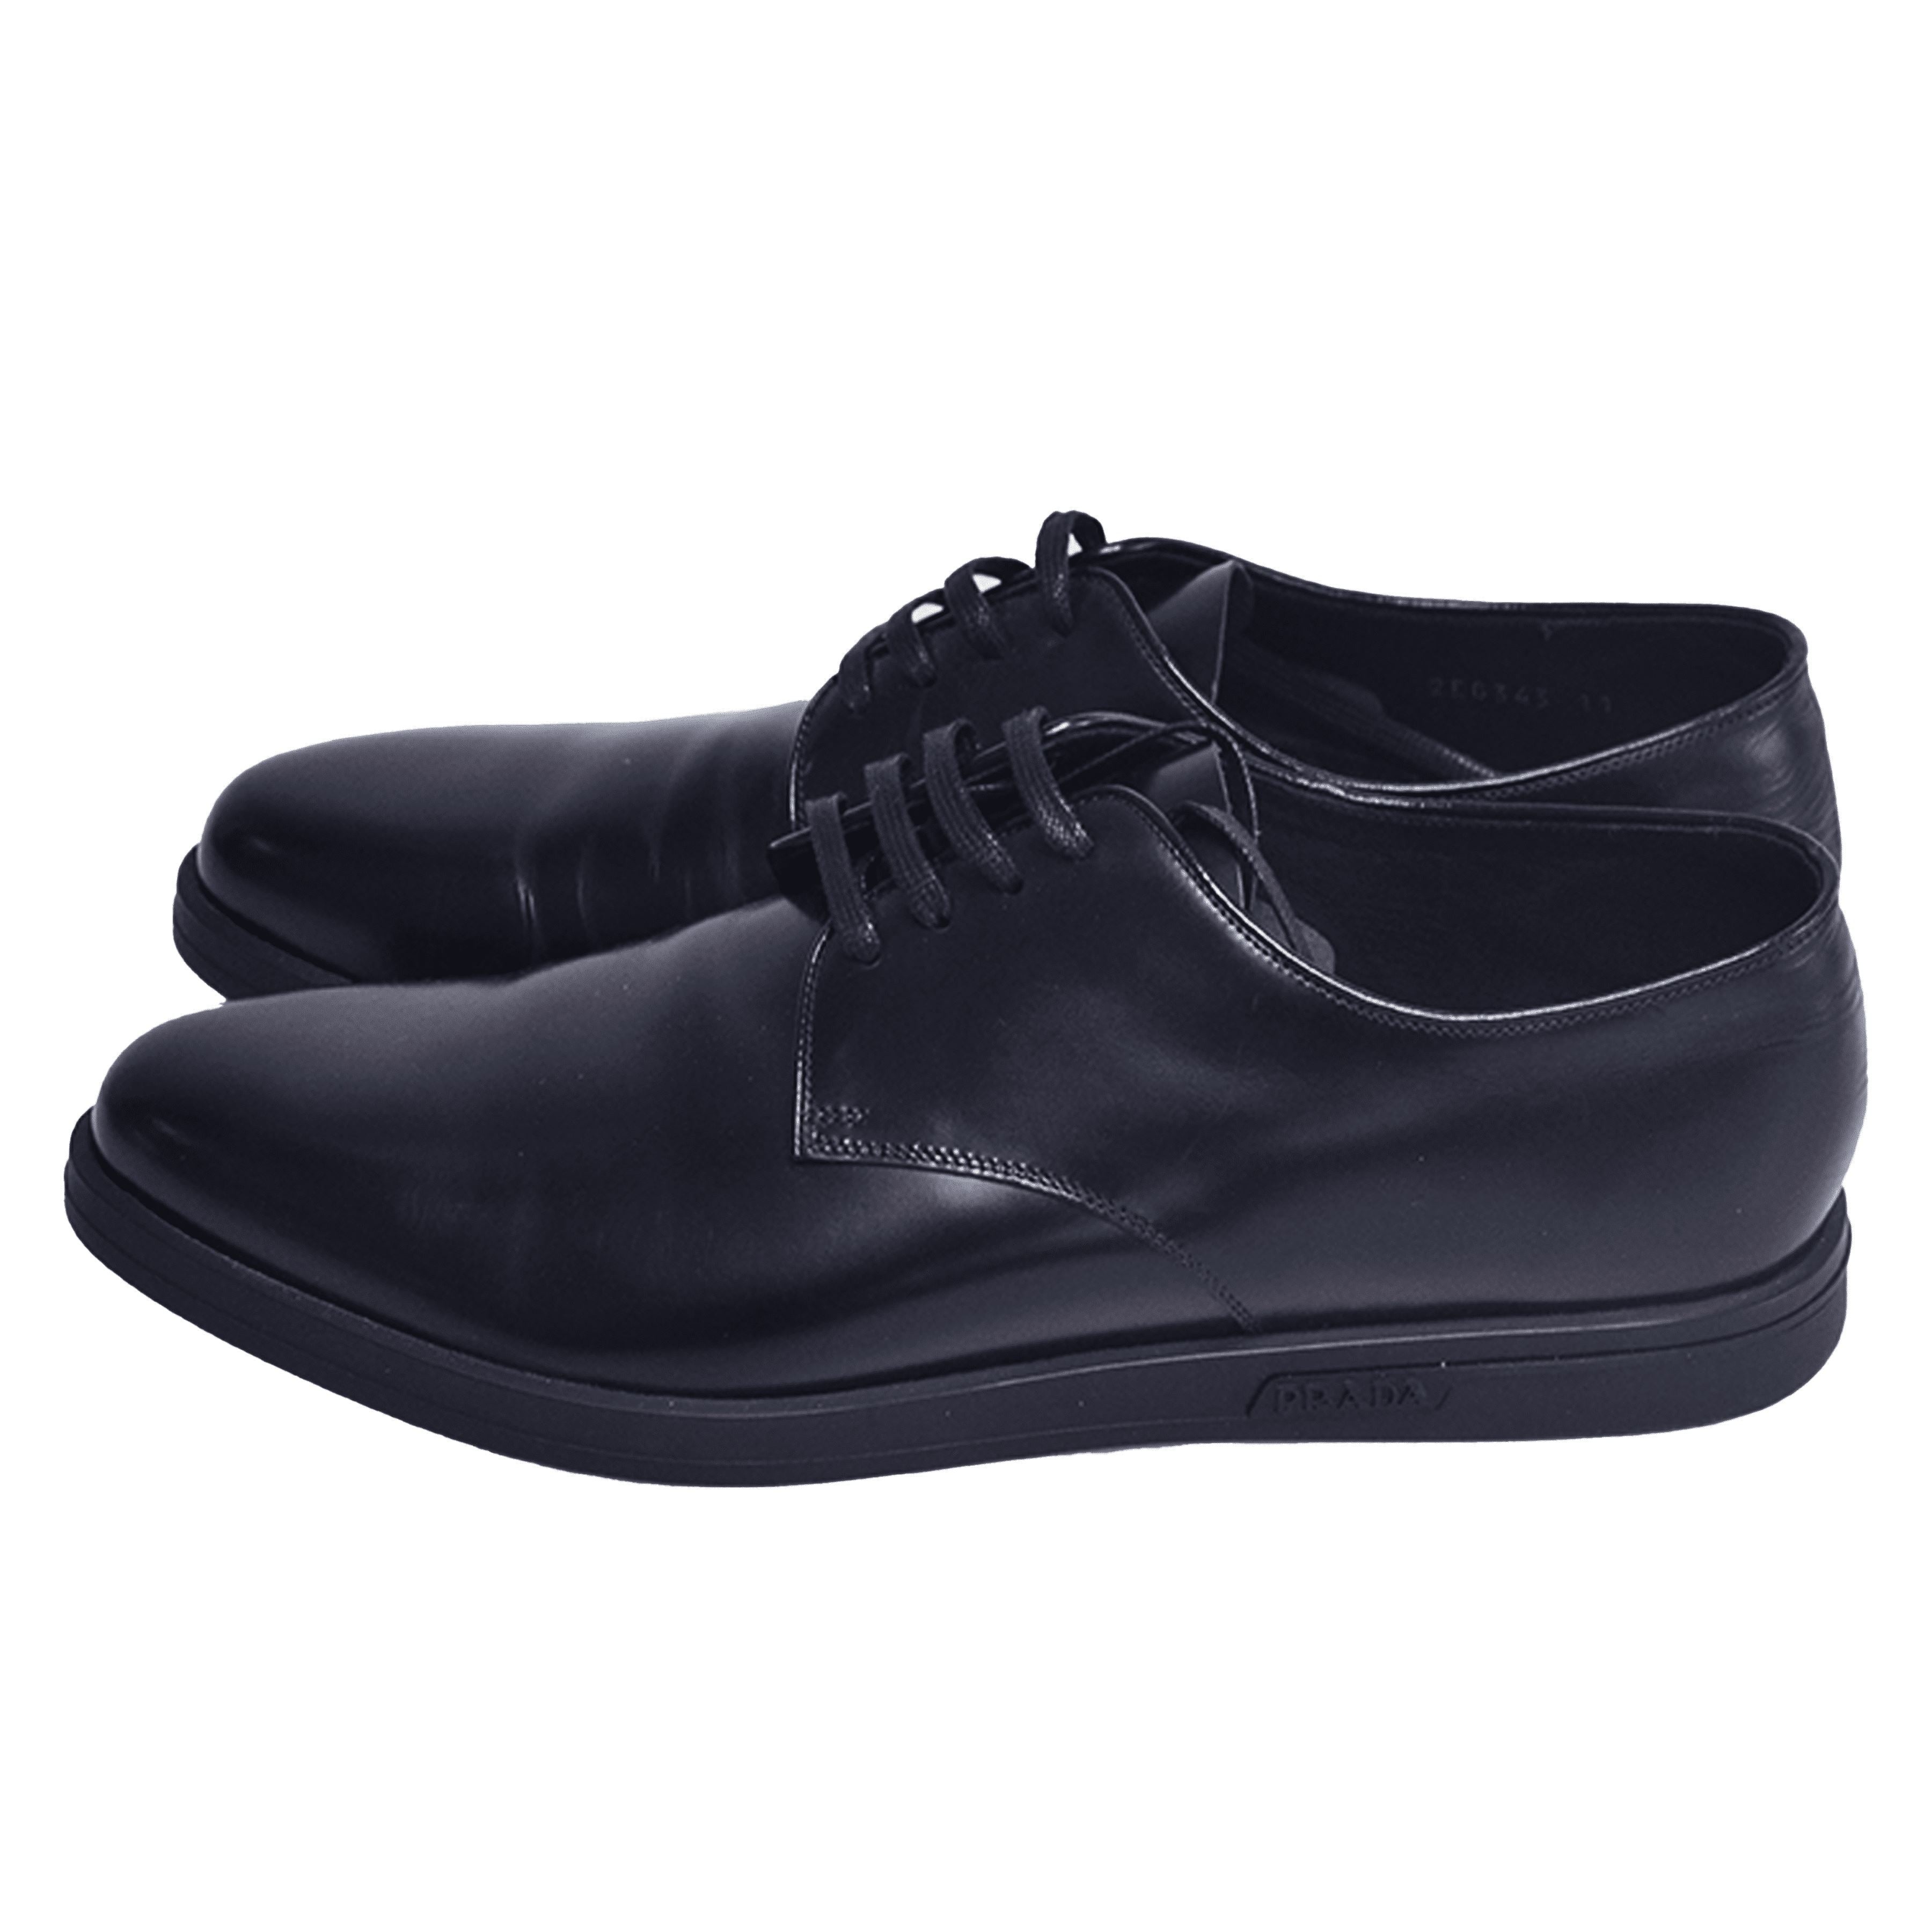 Black Brushed Leather Derby Shoes Shoes Prada 